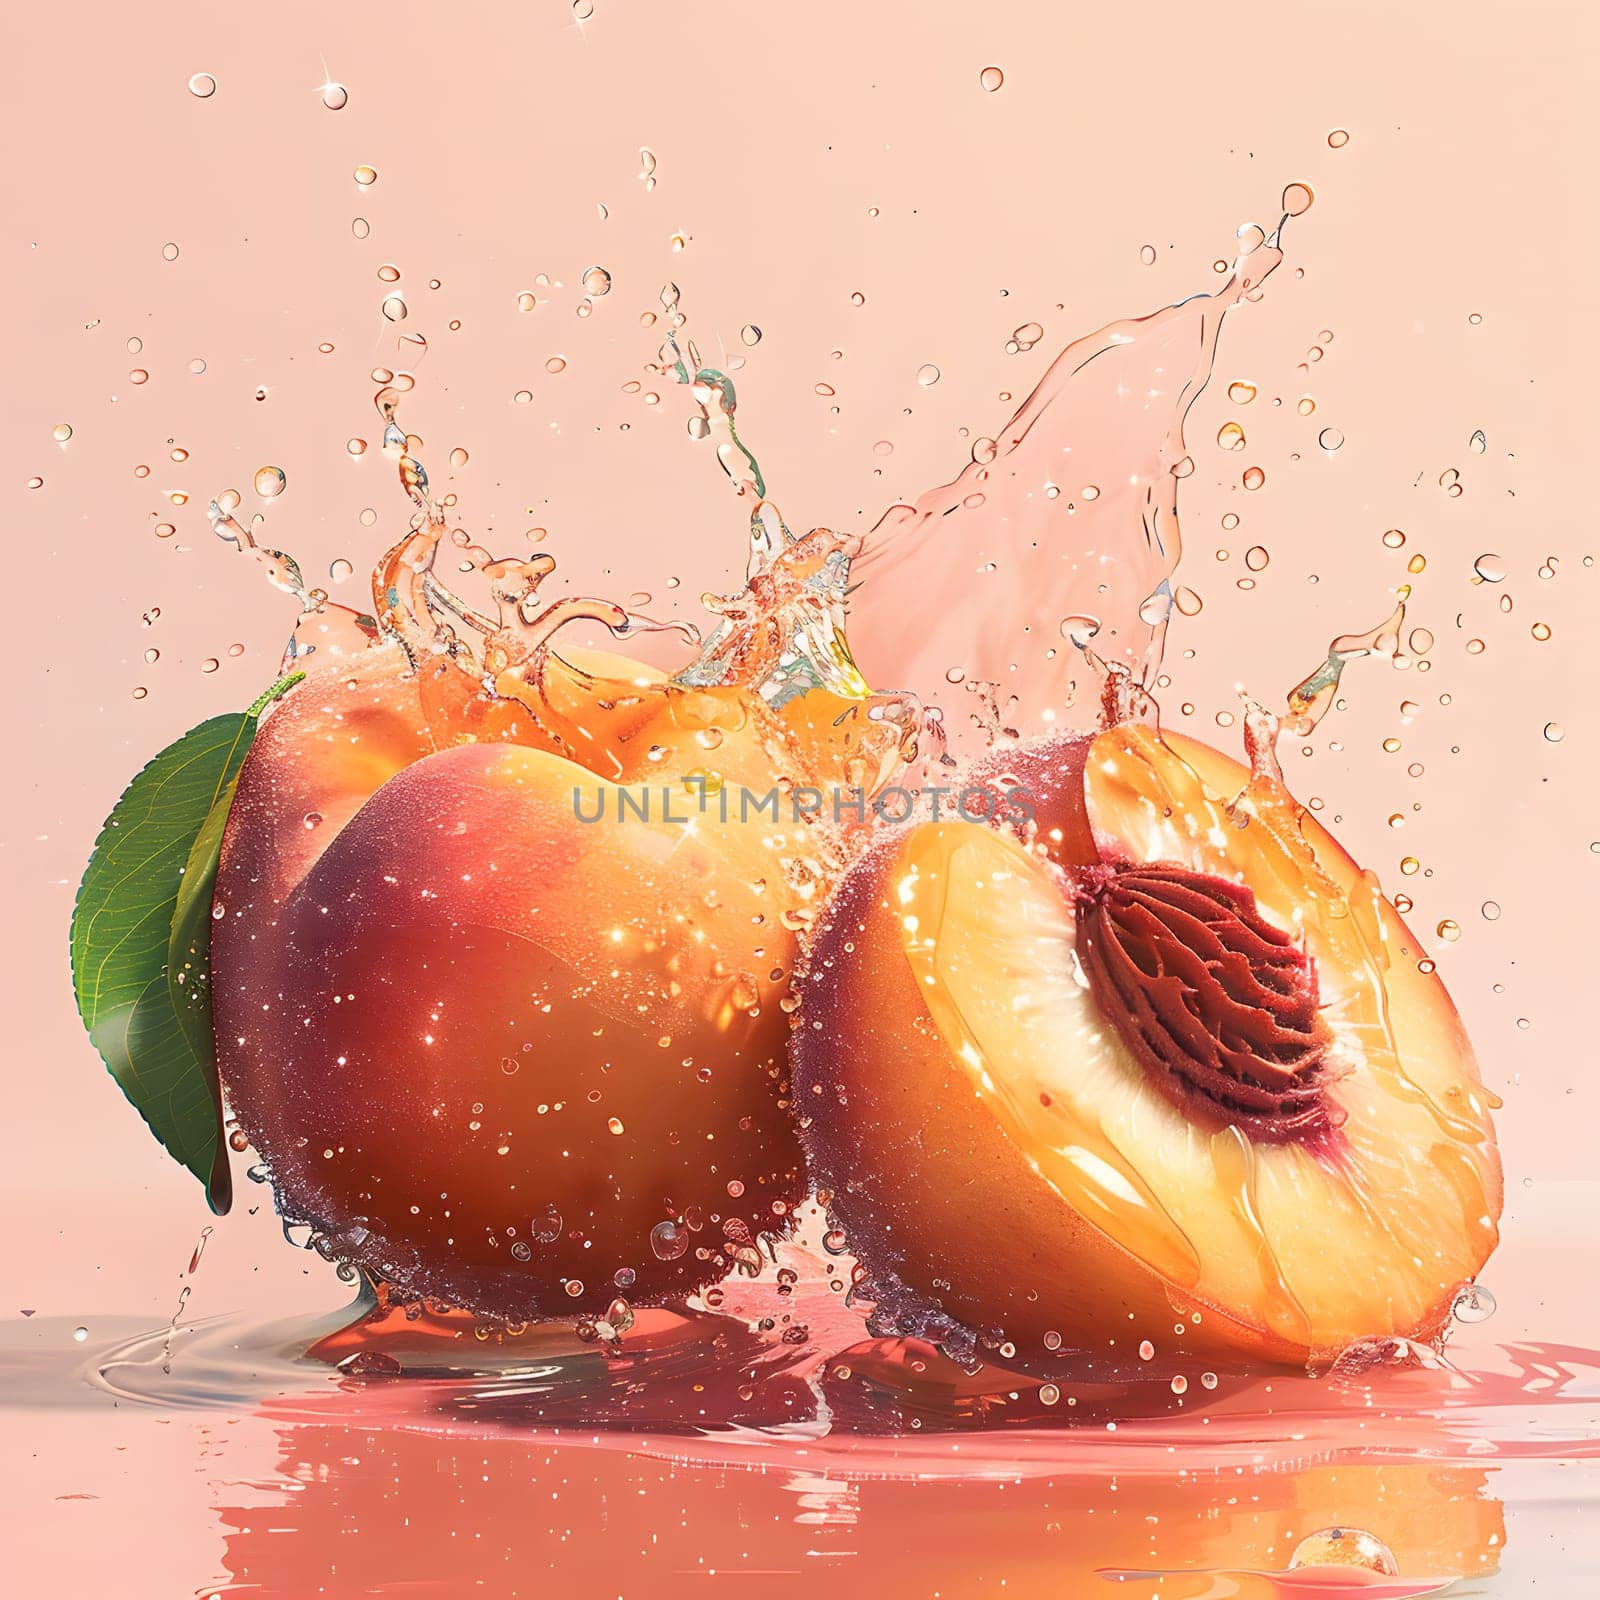 A peach being splashed with water on a pink background by Nadtochiy